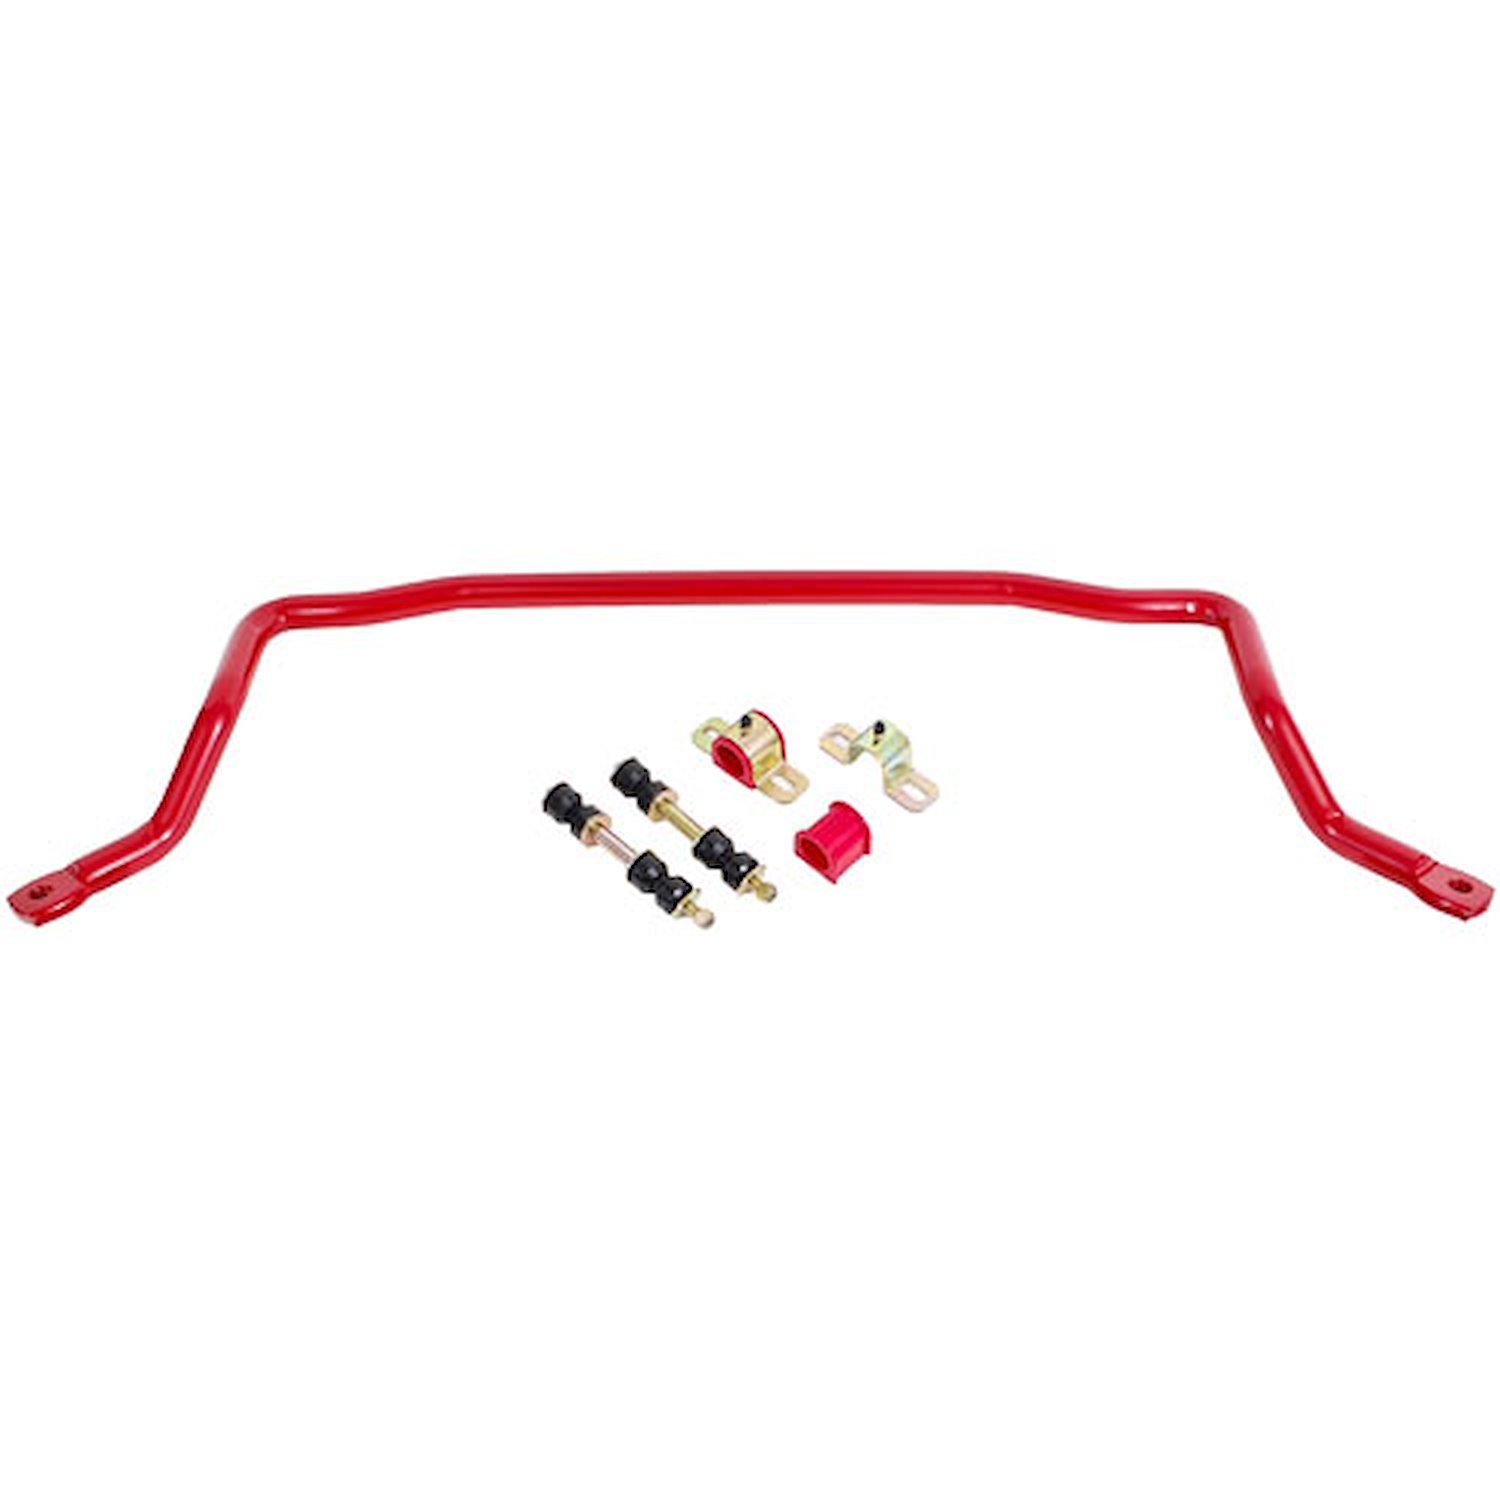 Sway Bar for 1978-1987 GM G-Body